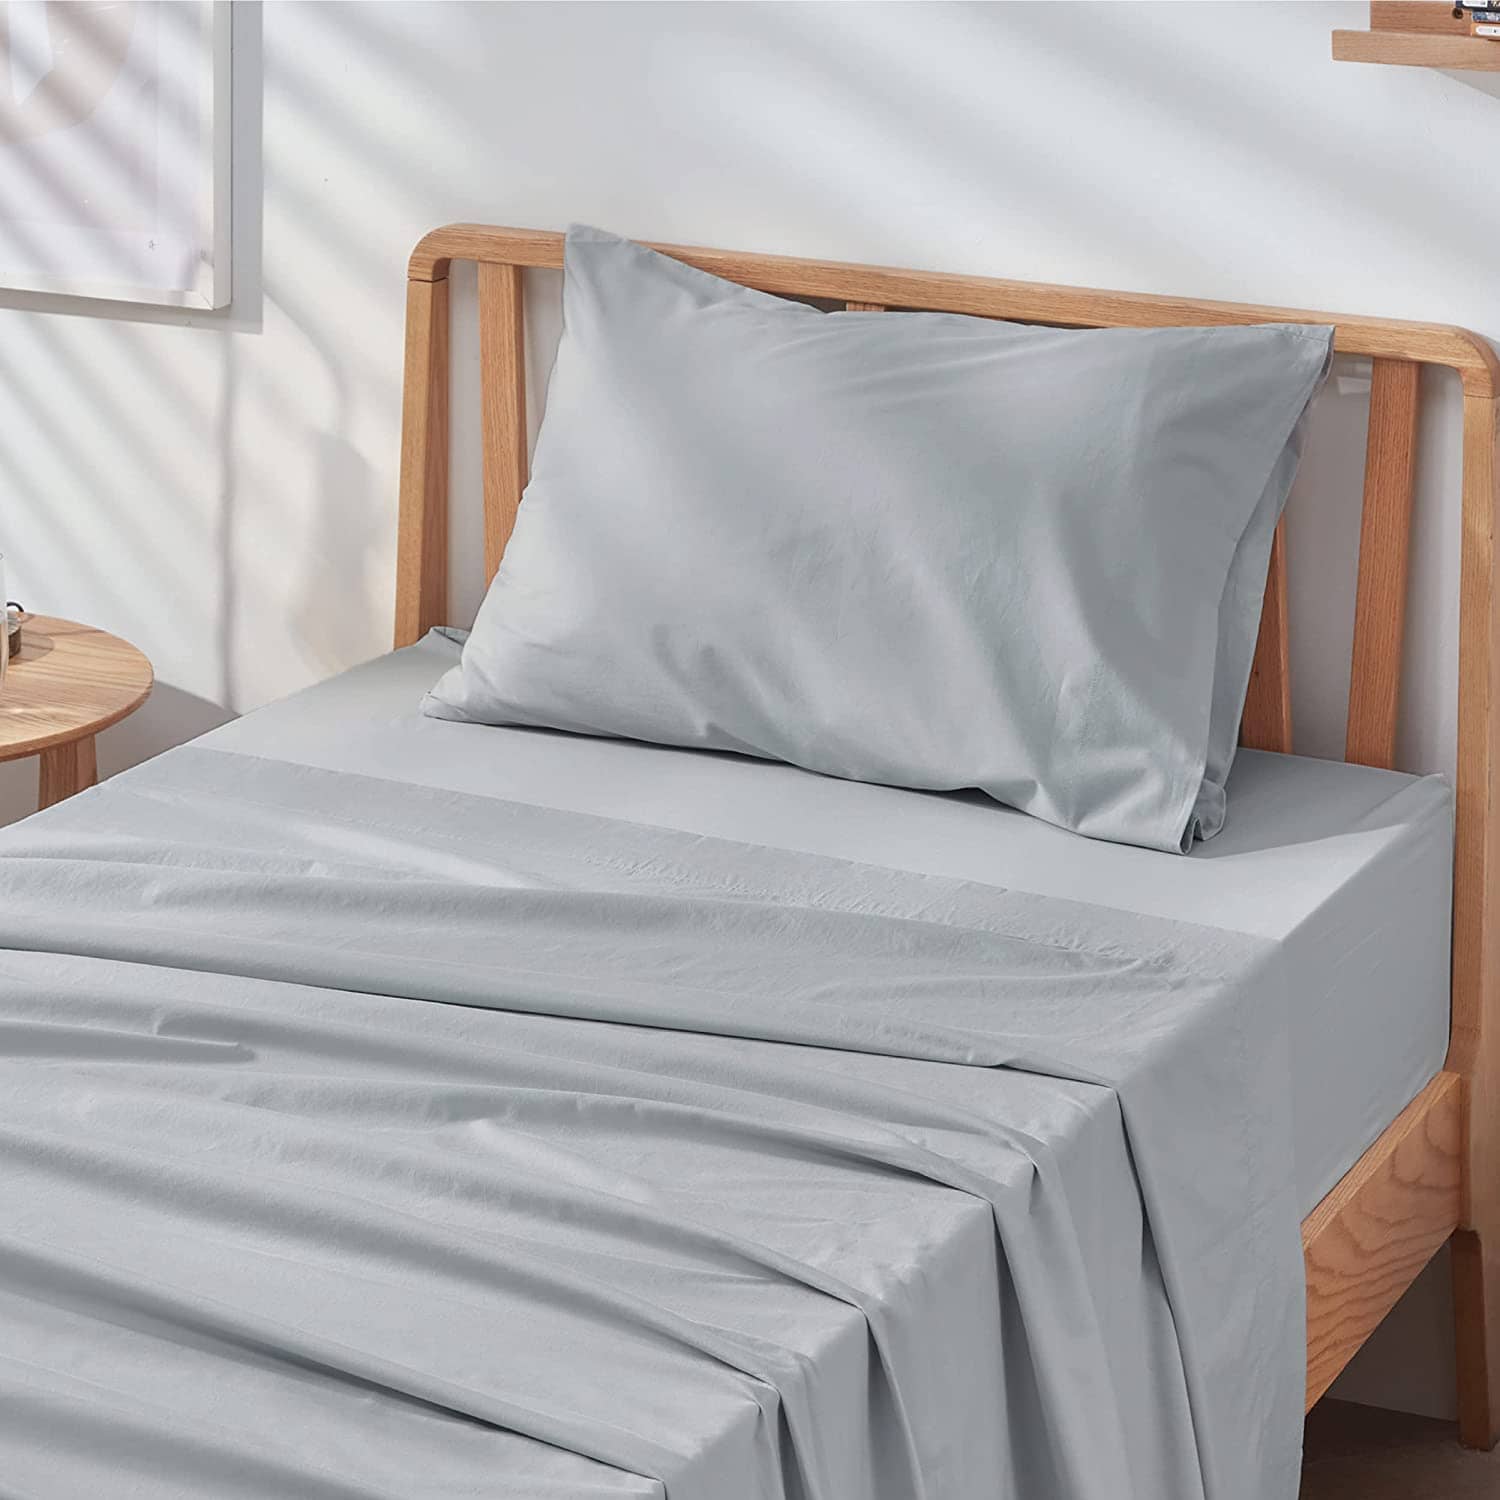 Bedsure Deep Pocket Full Size Sheets - Ultra Soft Cationic Dyed Full Bed  Sheets, Fits Mattresses Up …See more Bedsure Deep Pocket Full Size Sheets 